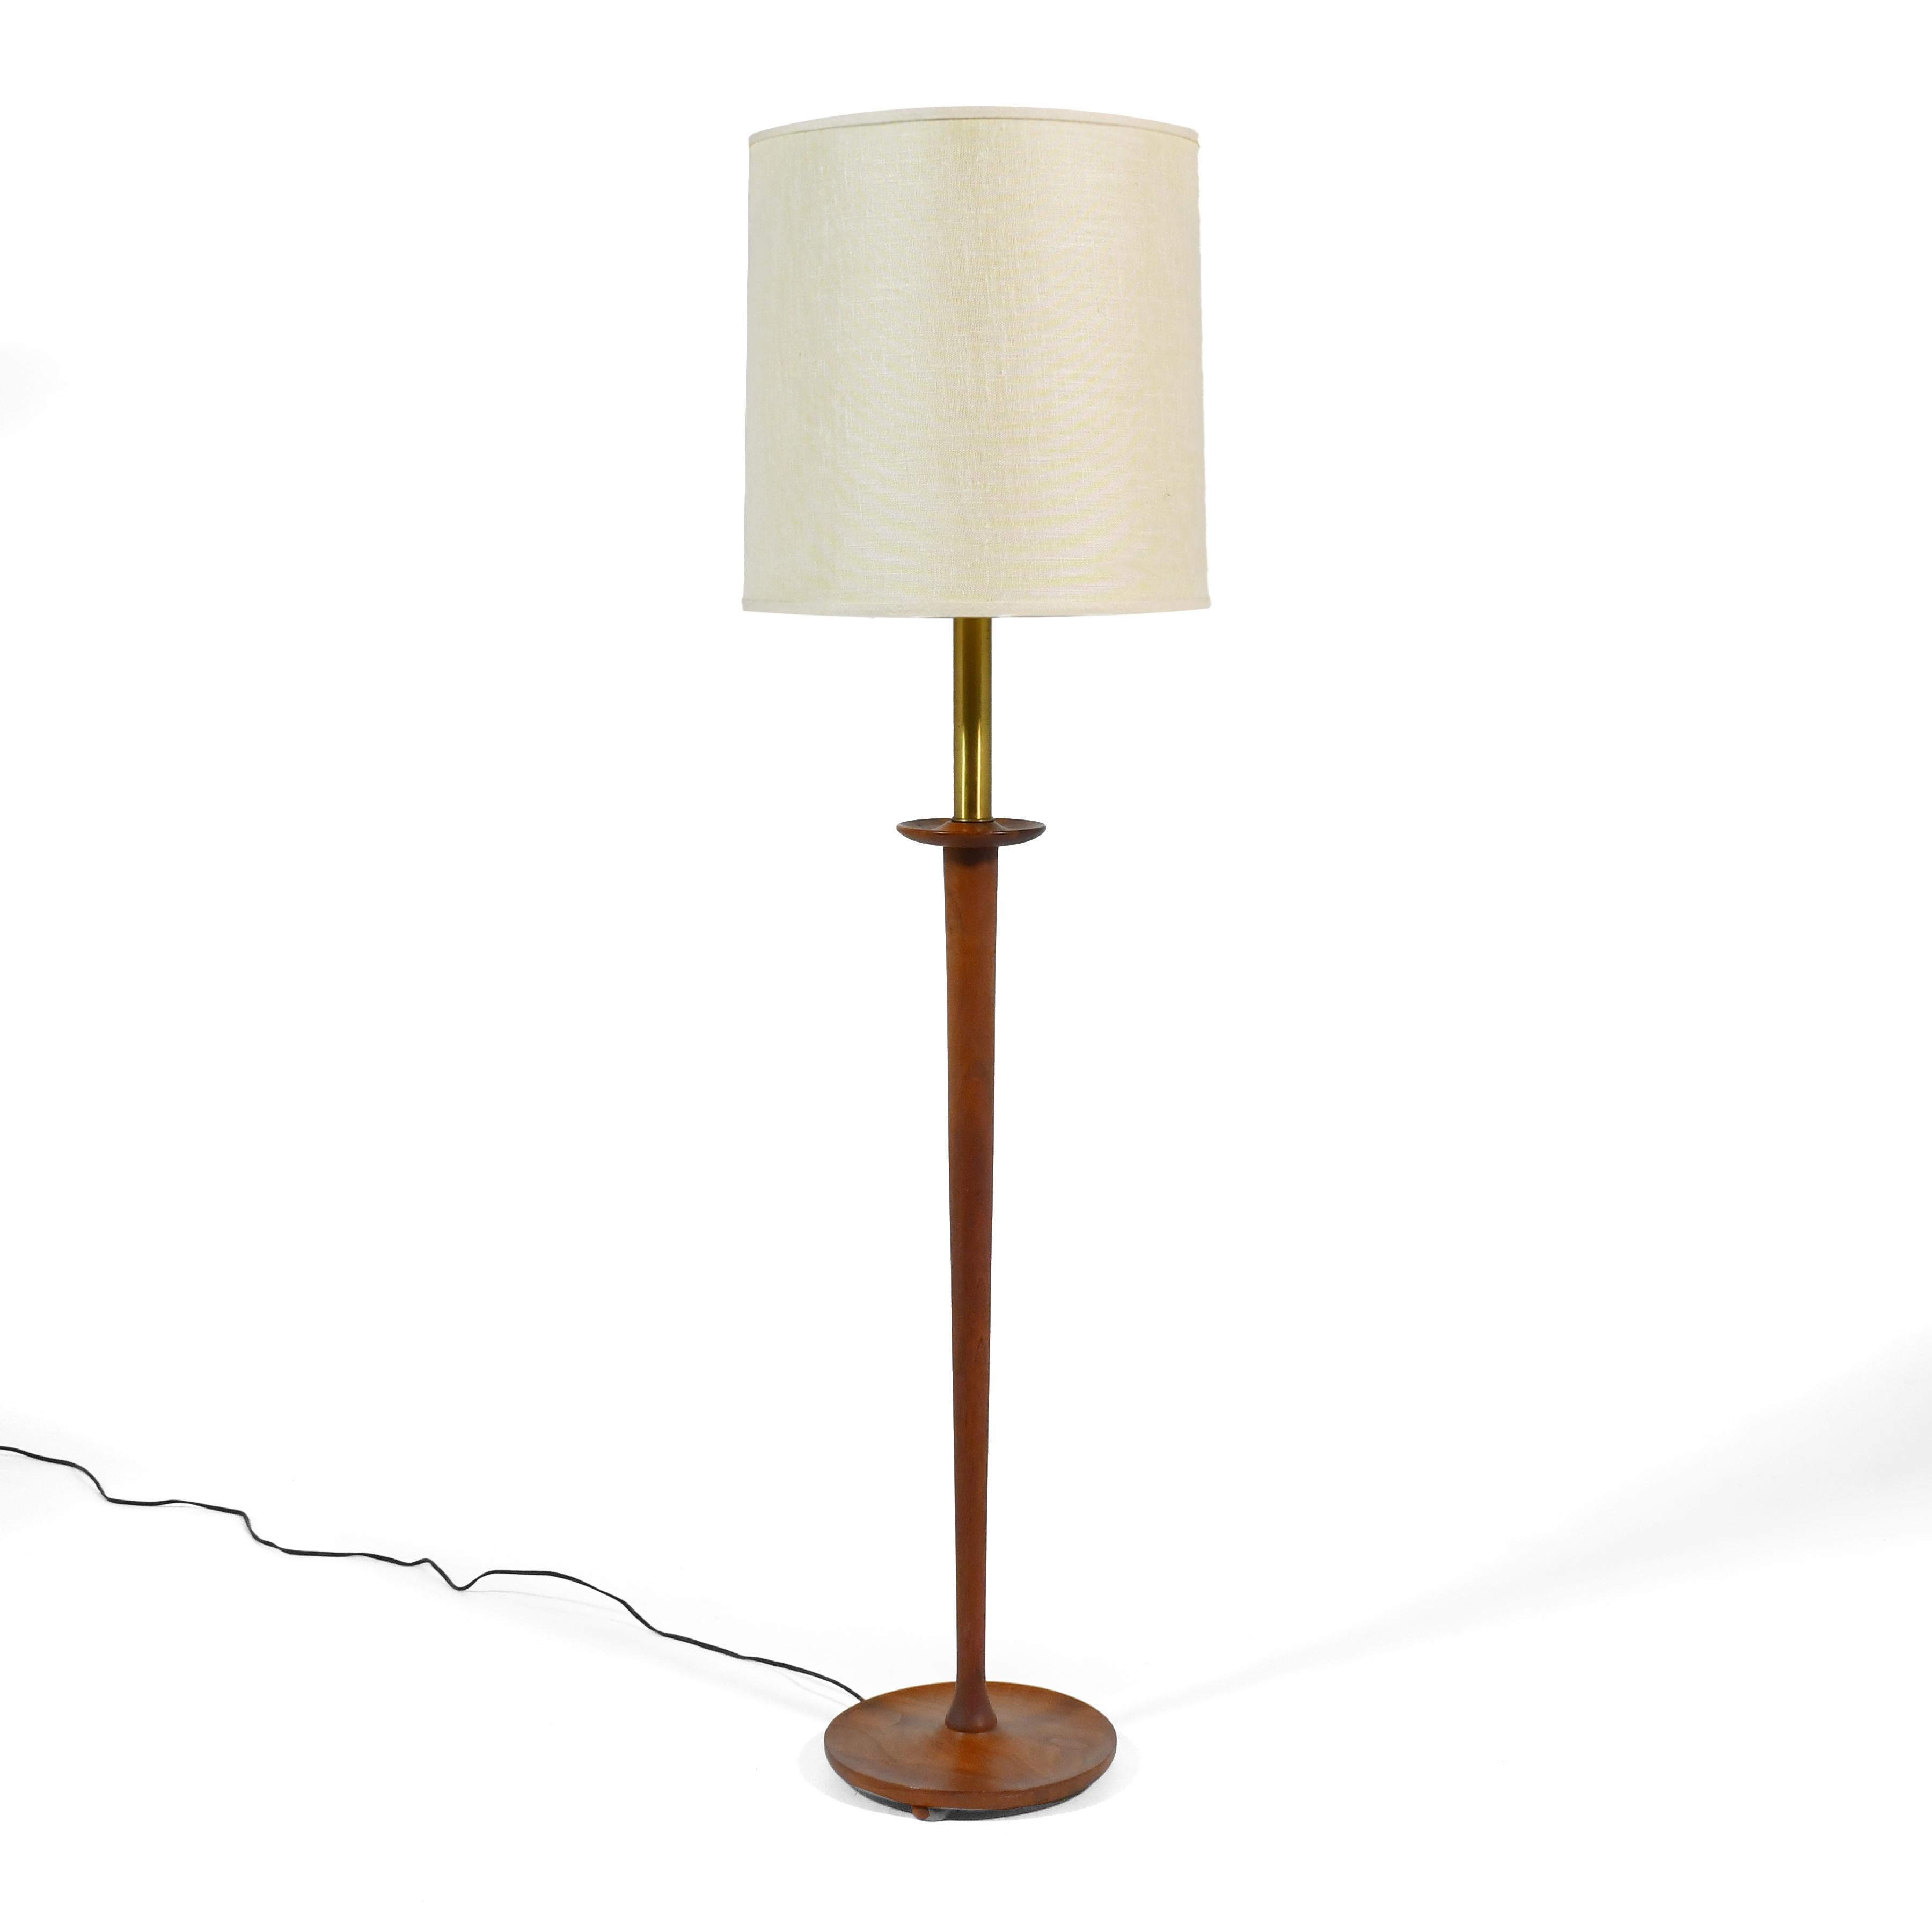 The appeal of this lamp lies in the beautifully sculpted details of its solid walnut base. The neck is cylindrical brass which meets the walnut which has a tapered column with lovely subtle curves where it meets the neck and base. Three recessed